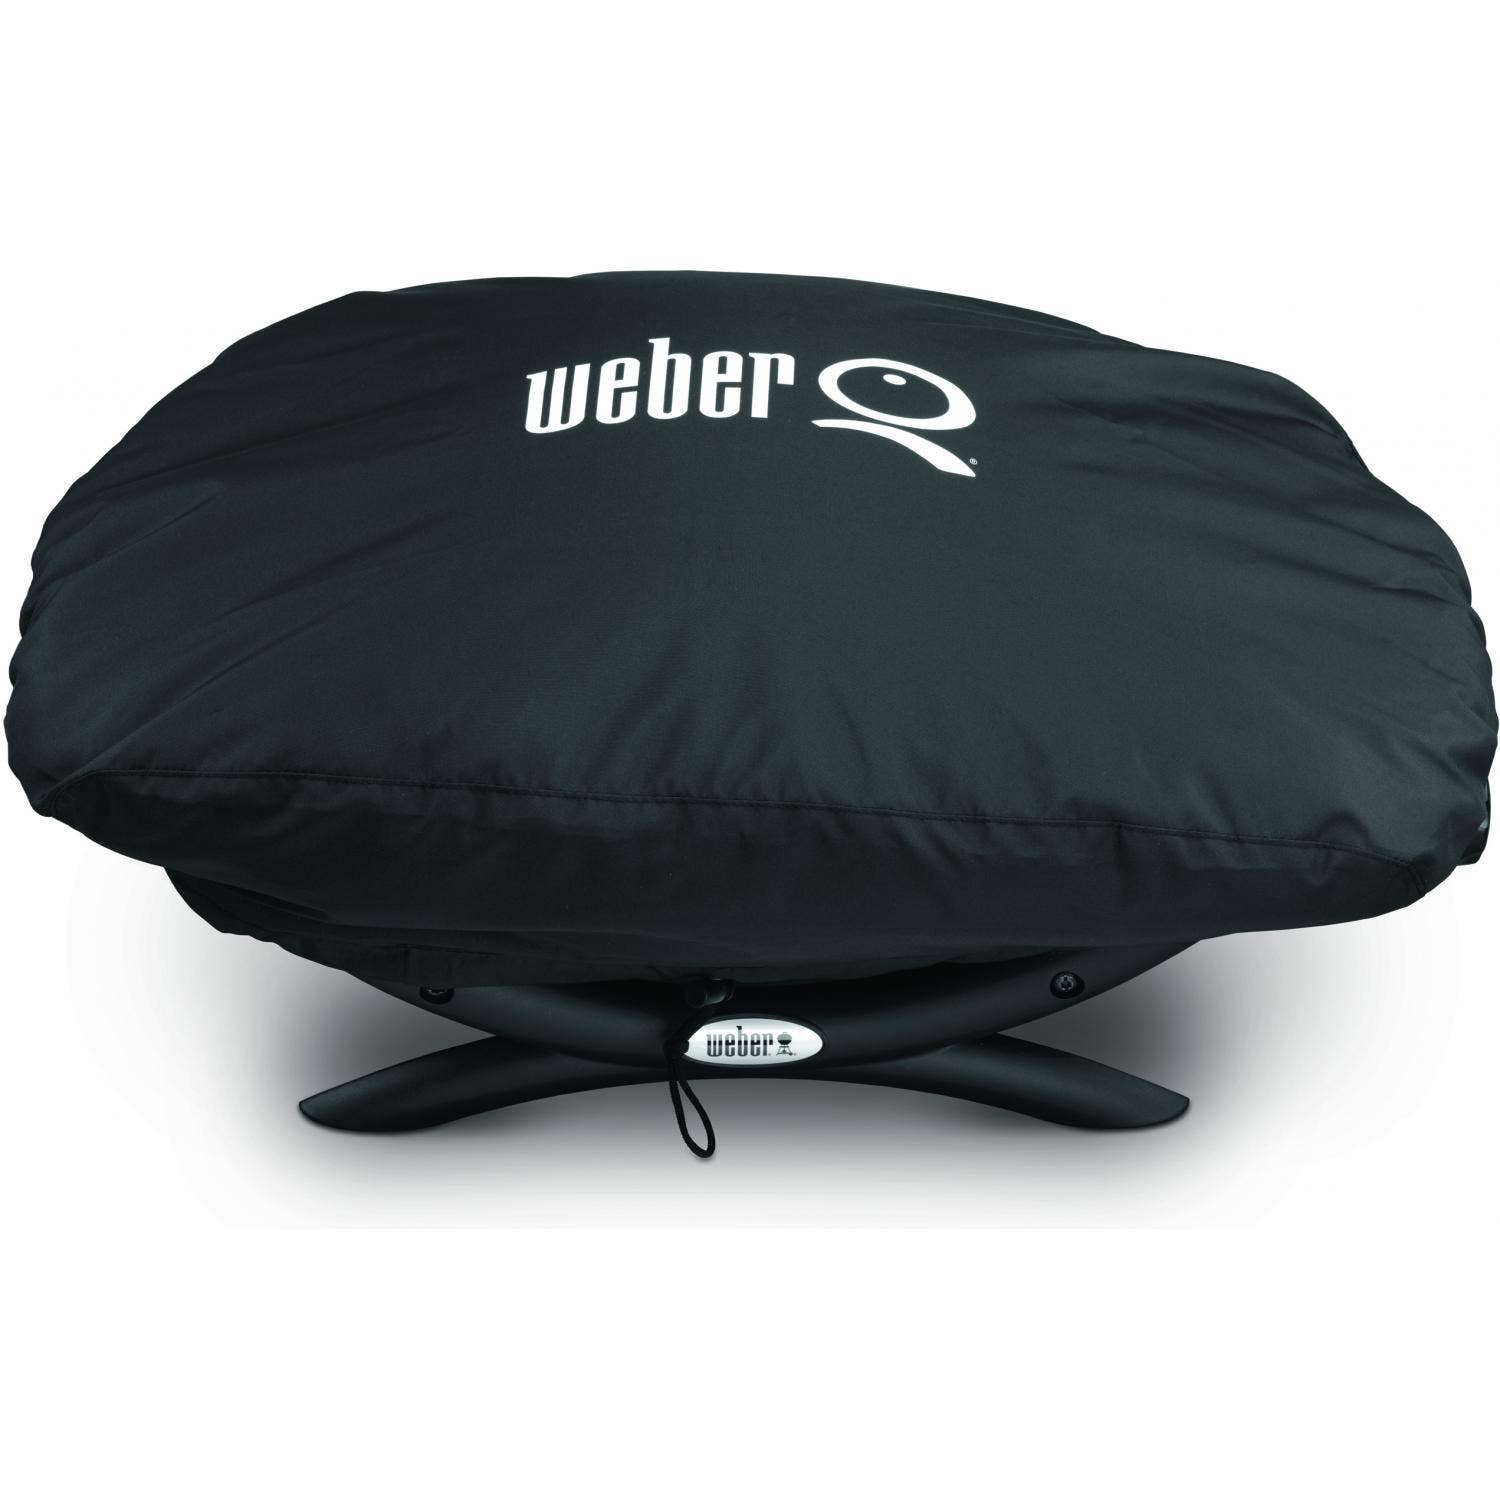 Weber Q Grill Cover for Q 200 and 2000 Series Gas Grills, 7111 Outdoor Grill Covers 12032445